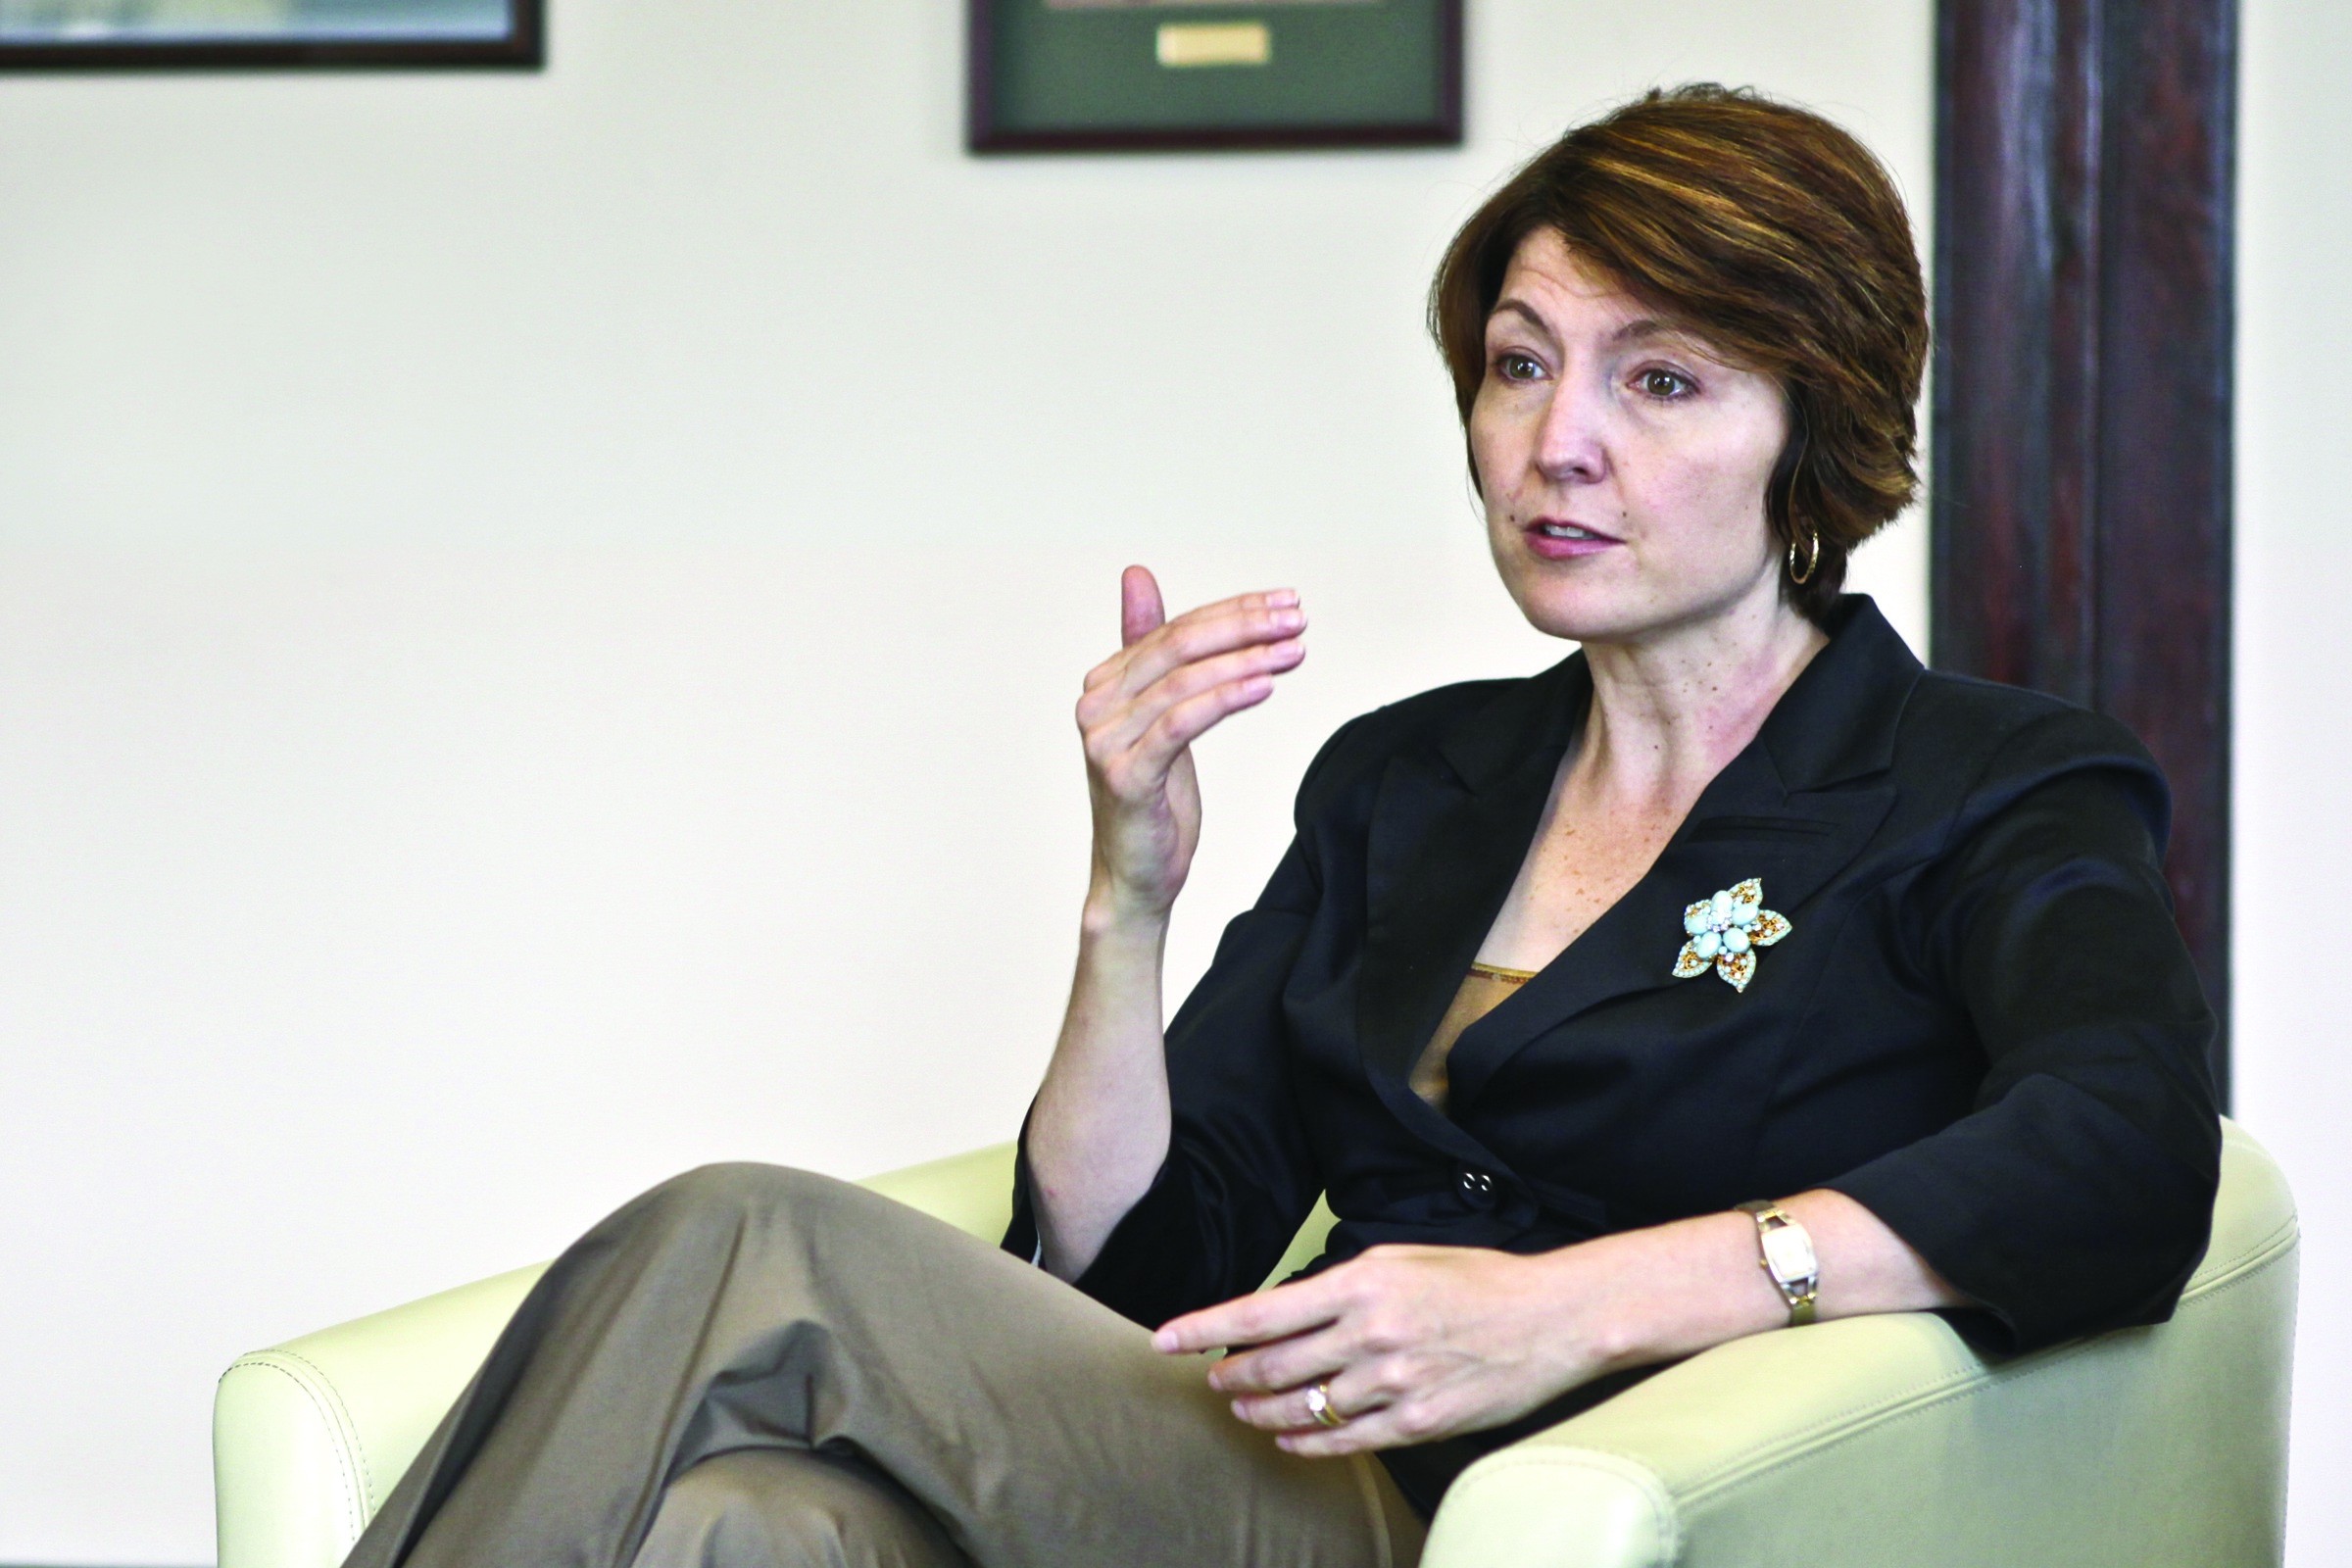 McMorris Rodgers vice presidential drumbeat continues